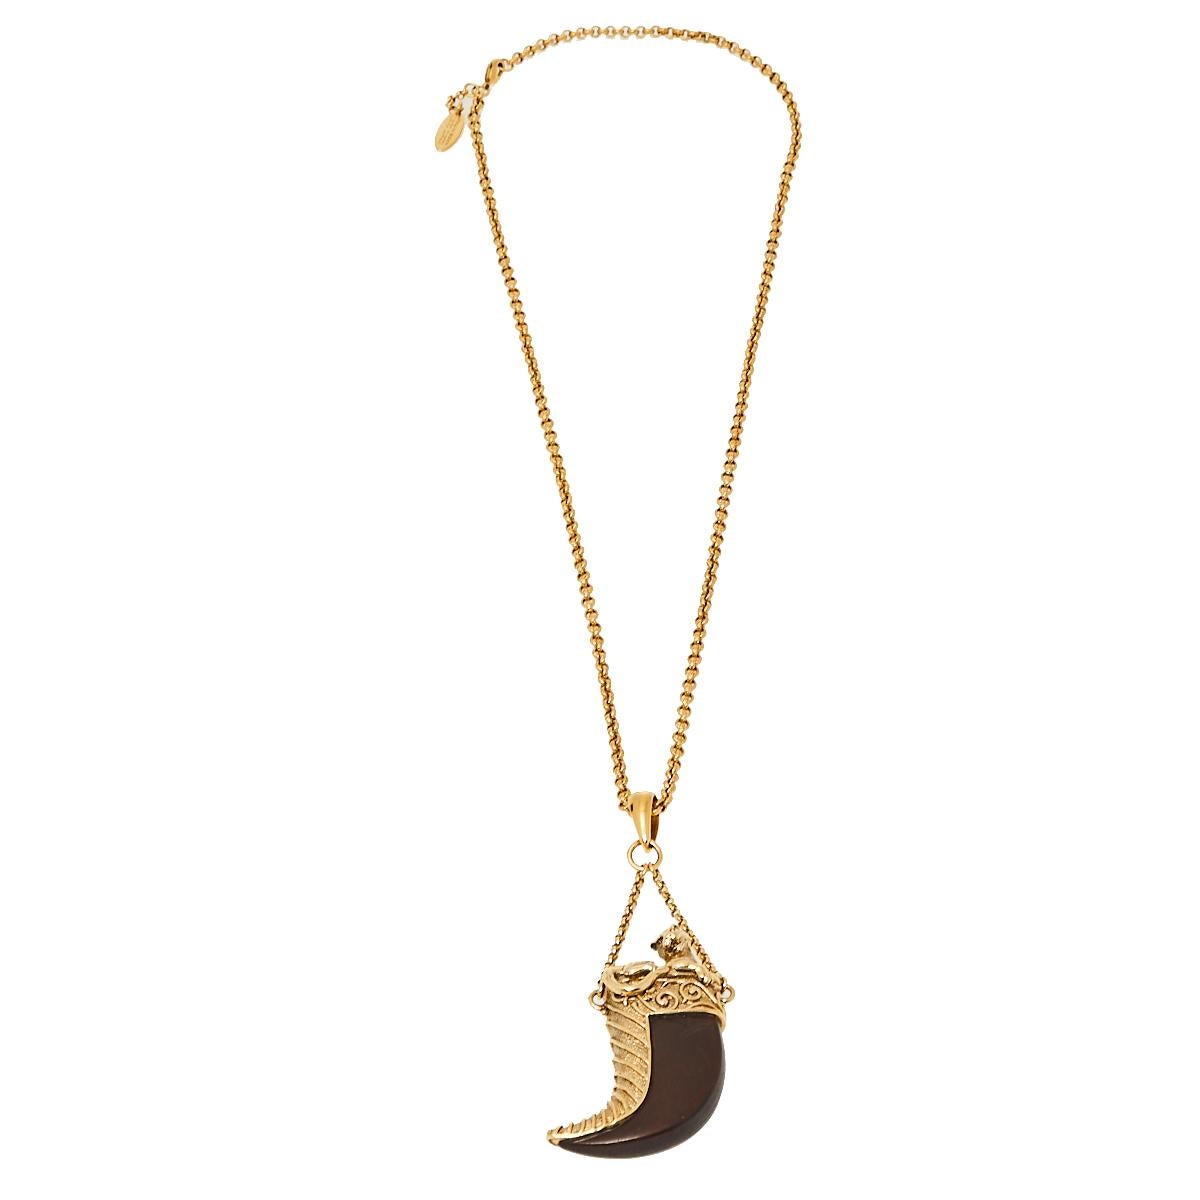 Flaunt a fierce tribal look with this tooth pendant necklace by Roberto Cavalli. Boasting a tooth-shaped pendant made from brown leather and enhanced with gold-tone metal, this necklace becomes an instant classic for everyday wear. Wear when you’re